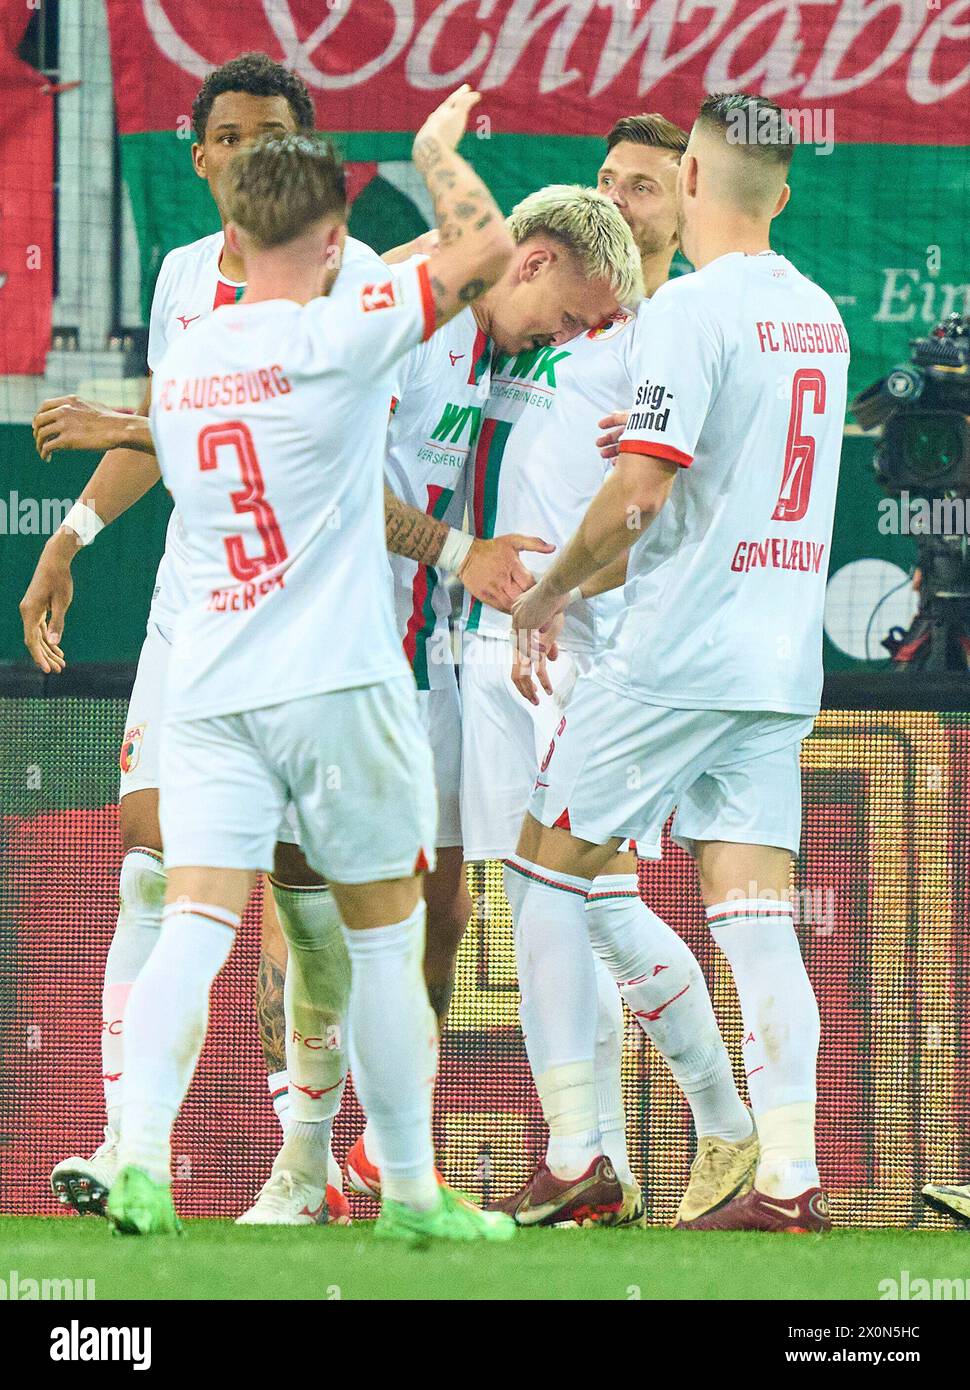 Philip Tietz, FCA 21 celebrates his goal, happy, laugh, celebration, 1-0 in the match FC AUGSBURG - 1. FC Union Berlin 2-0  on Apr 12, 2024 in Augsburg, Germany. Season 2023/2024, 1.Bundesliga, FCA, matchday 29, 29.Spieltag Photographer: ddp images / star-images    - DFL REGULATIONS PROHIBIT ANY USE OF PHOTOGRAPHS as IMAGE SEQUENCES and/or QUASI-VIDEO - Stock Photo